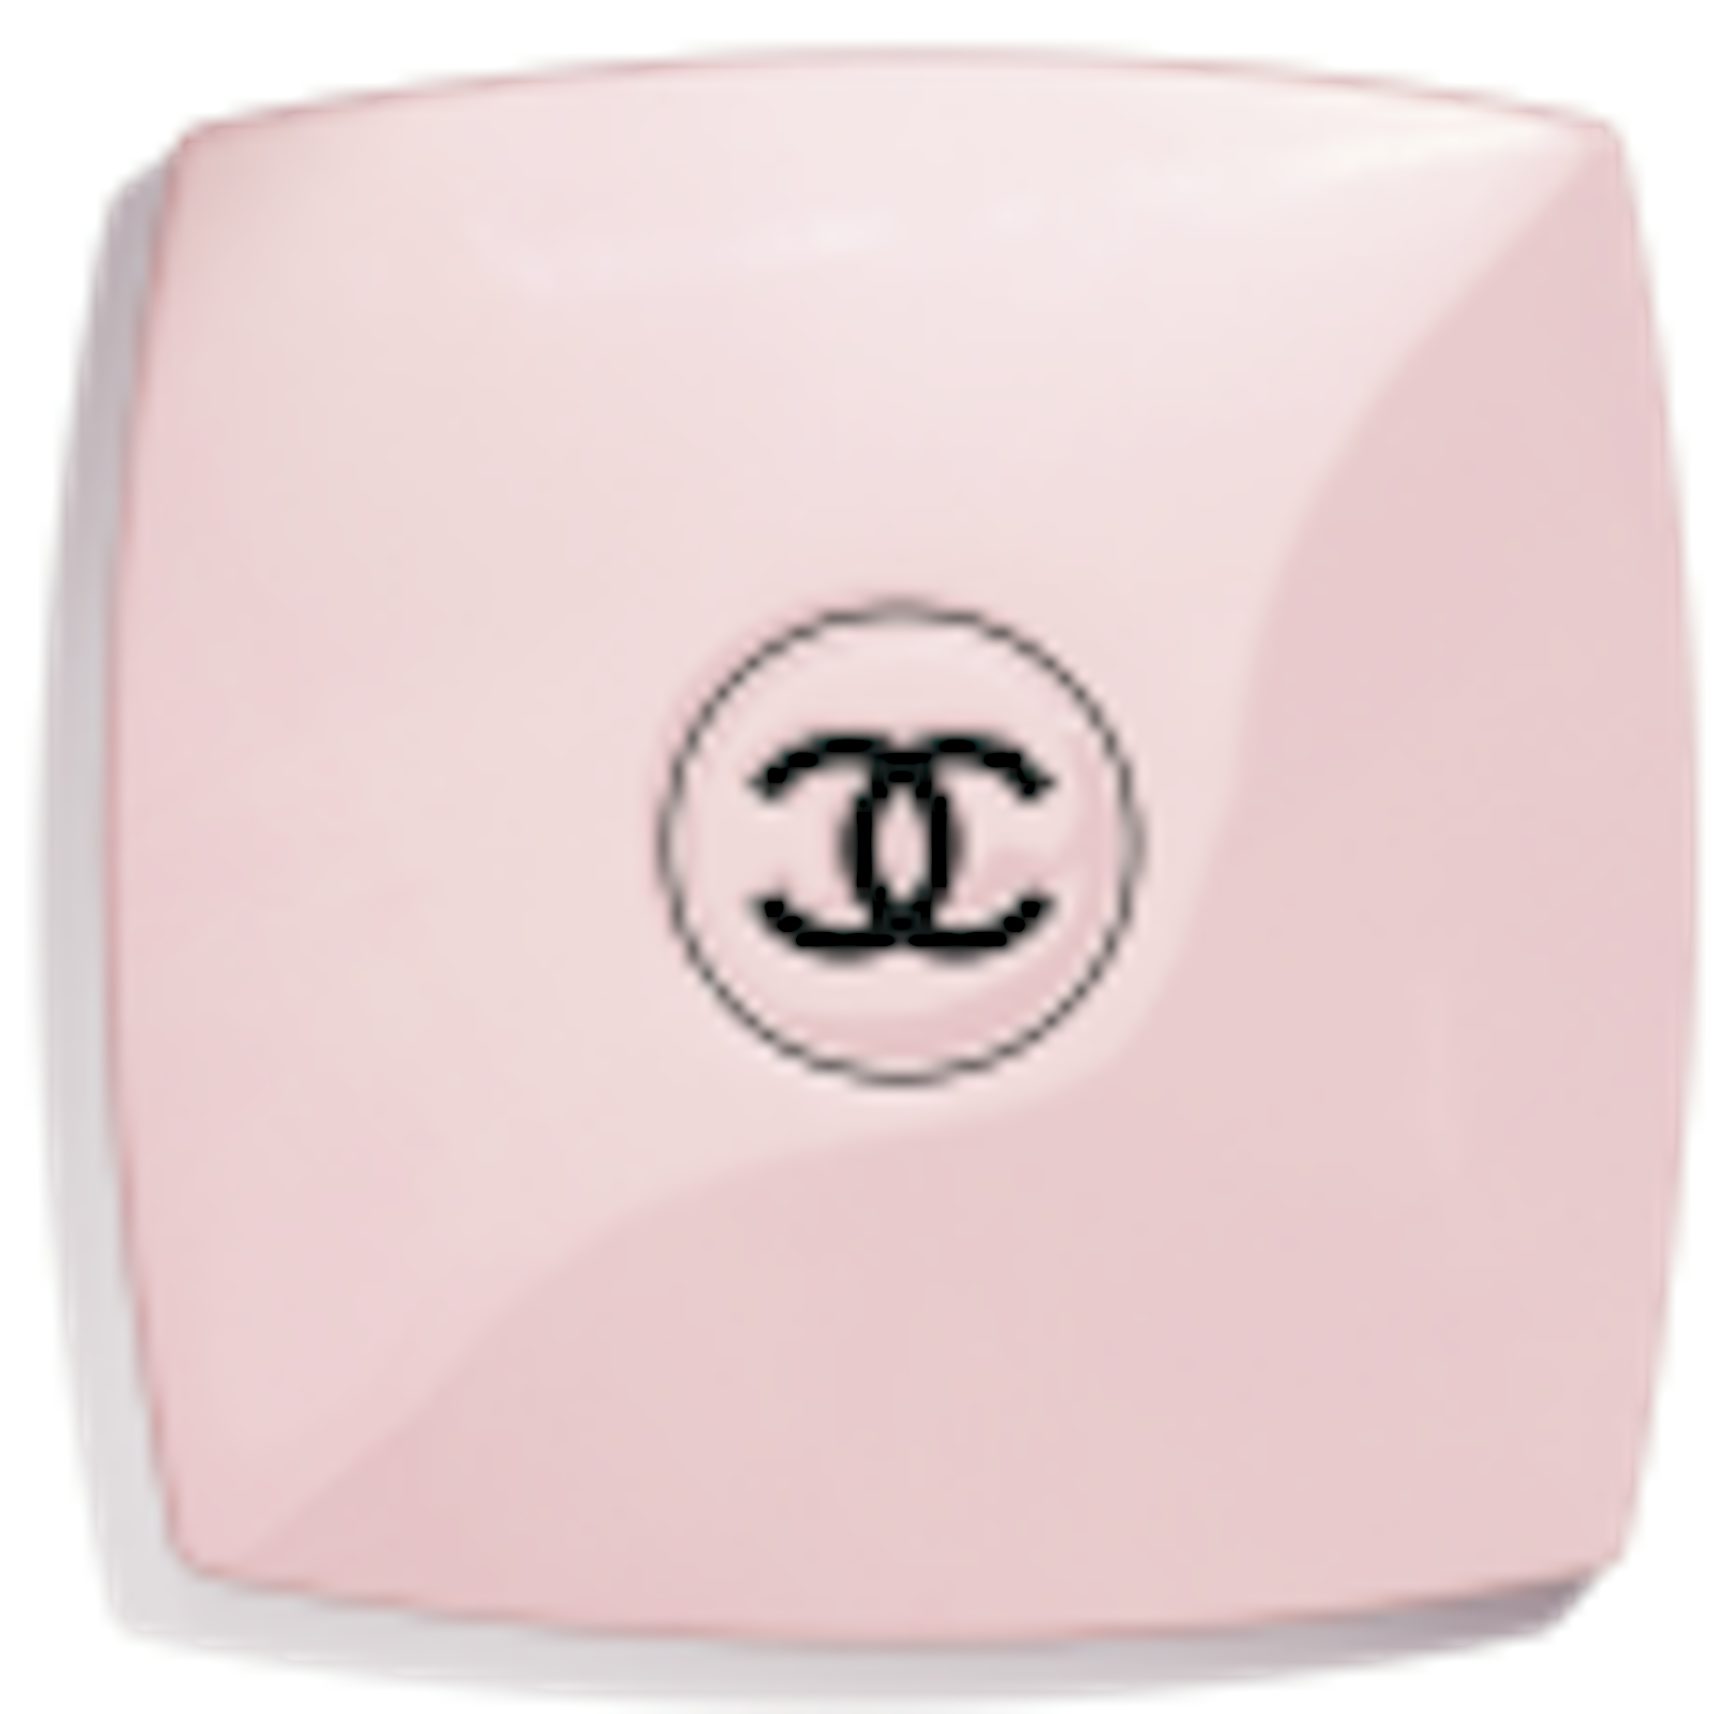 Chanel codes couleur in Immortelle and ballerina pink. Brush set, mirror,  and nail file 